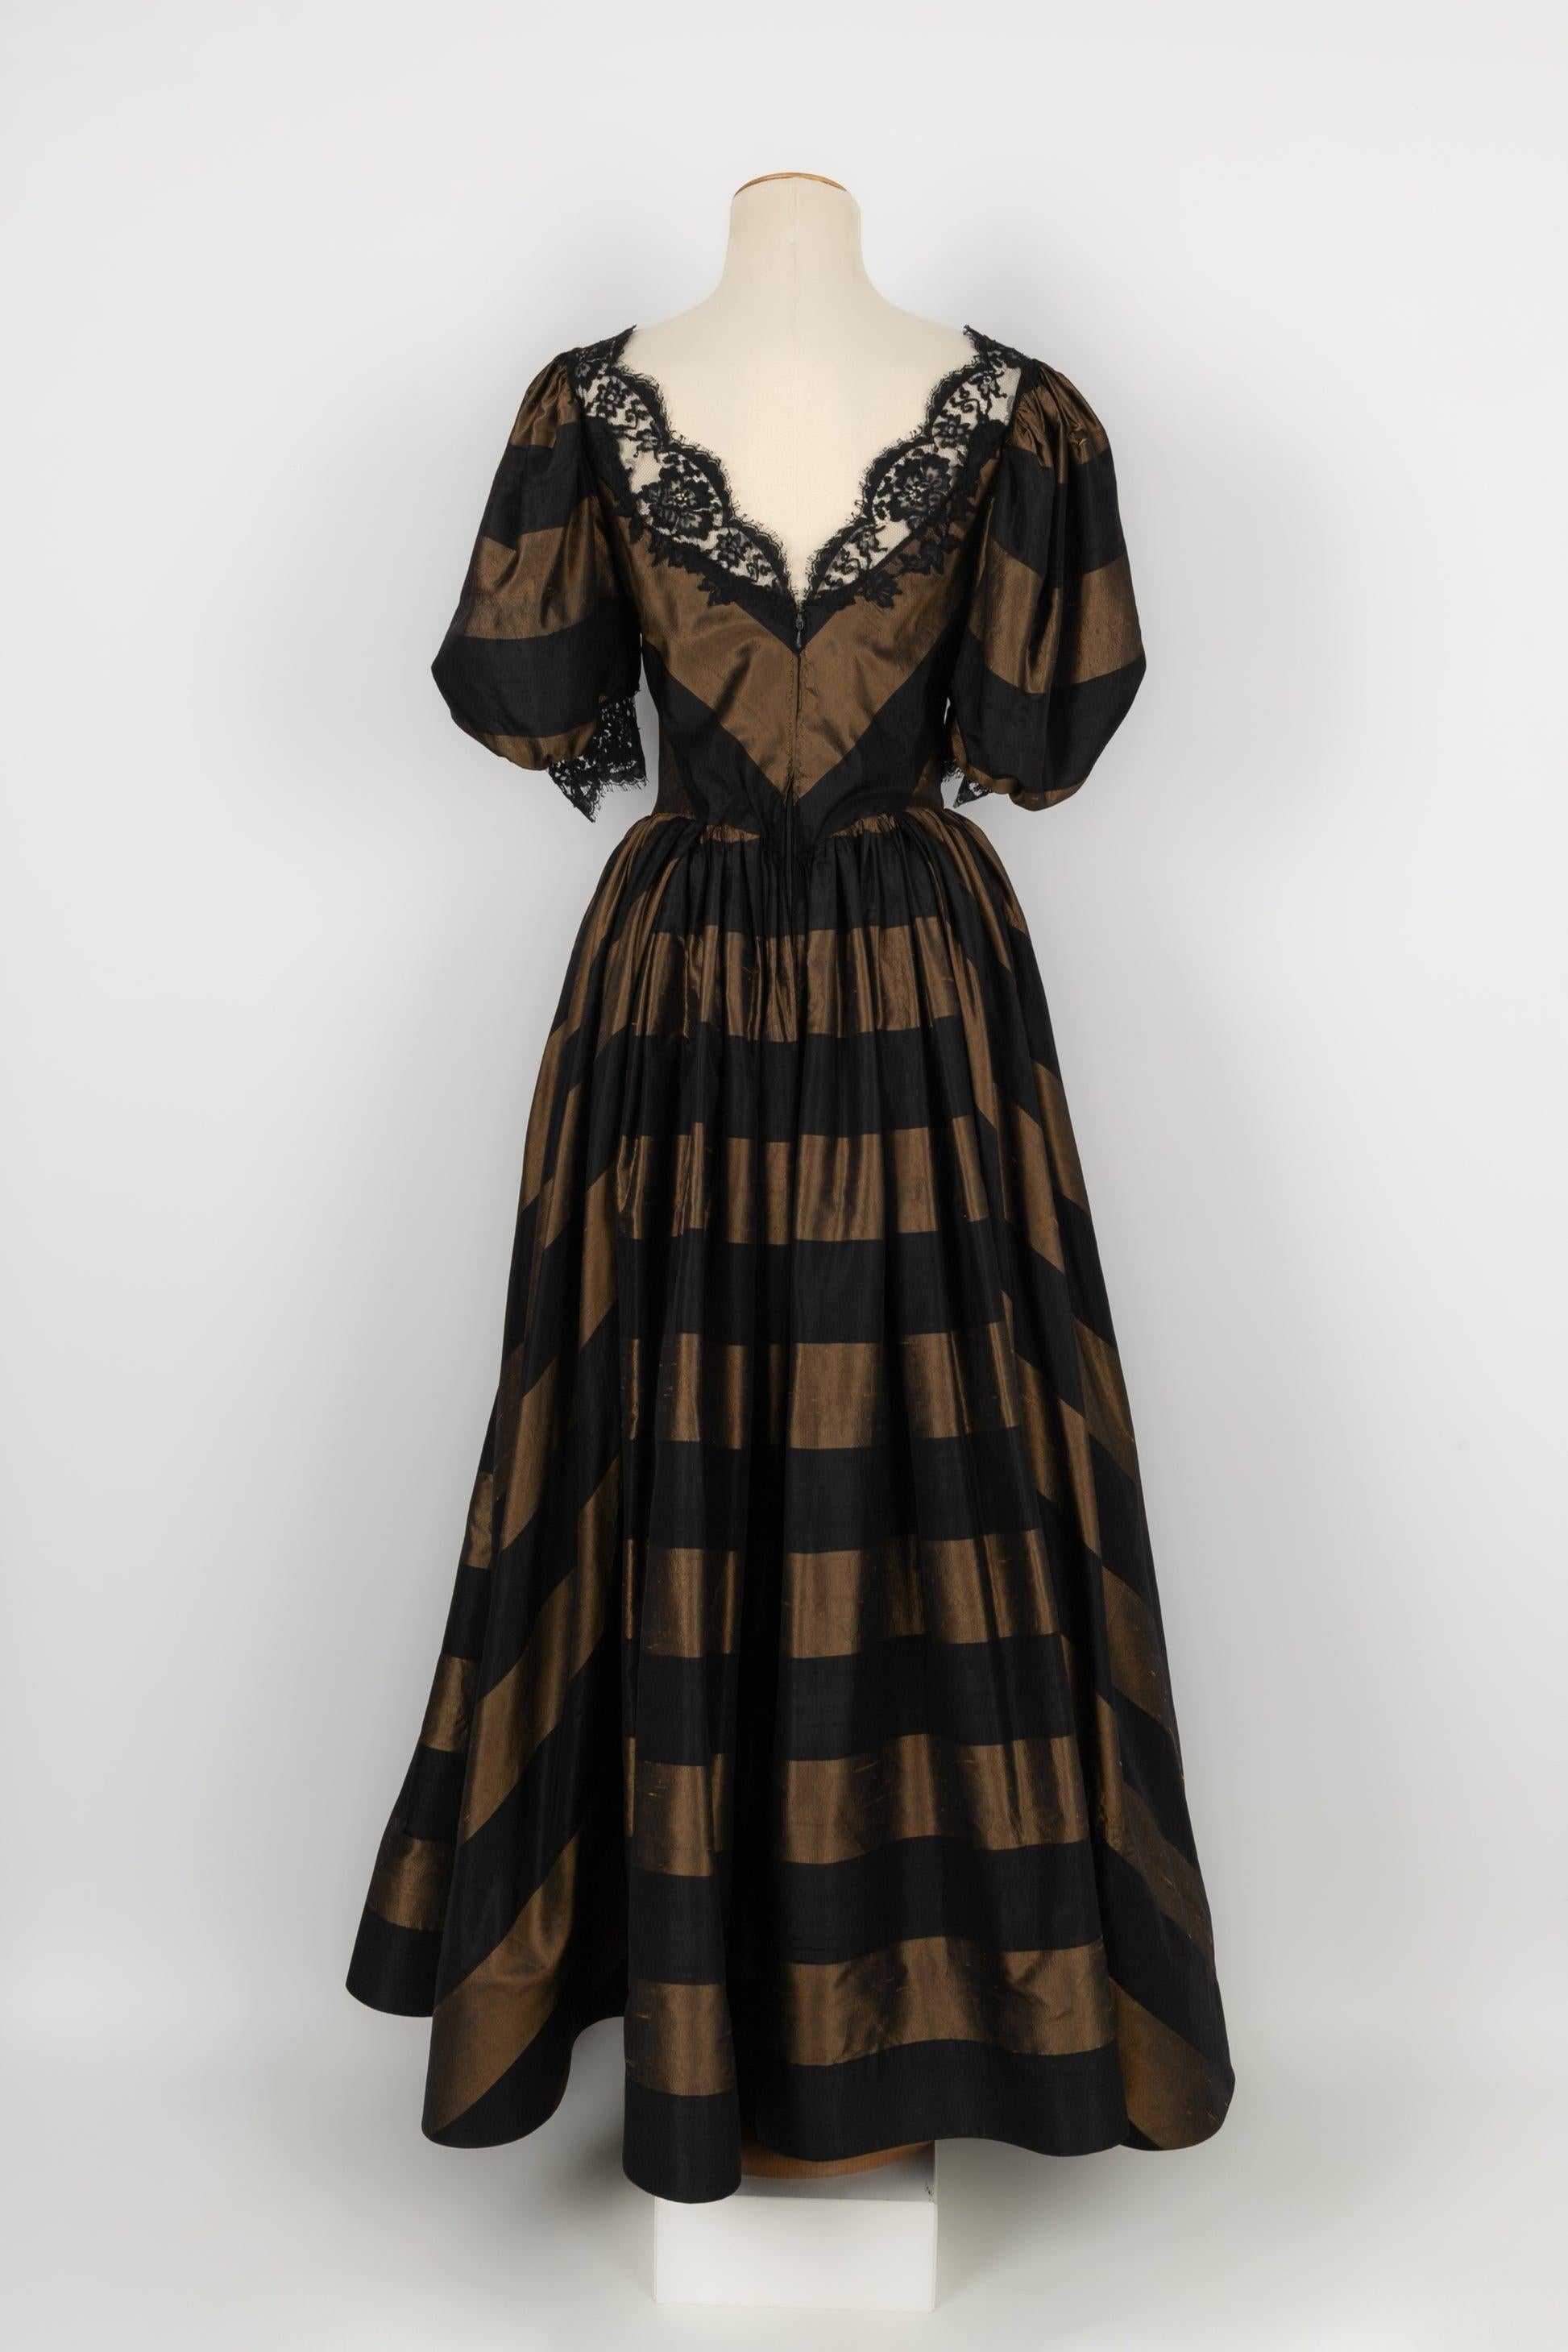 Louis Feraud - (Made in France) Haute Couture black and brown silk taffeta dress sewn with lace. No size nor composition label, it fits a 36FR/38FR.

Additional information:
Condition: Very good condition
Dimensions: Chest: 40 cm - Waist: 31 cm -